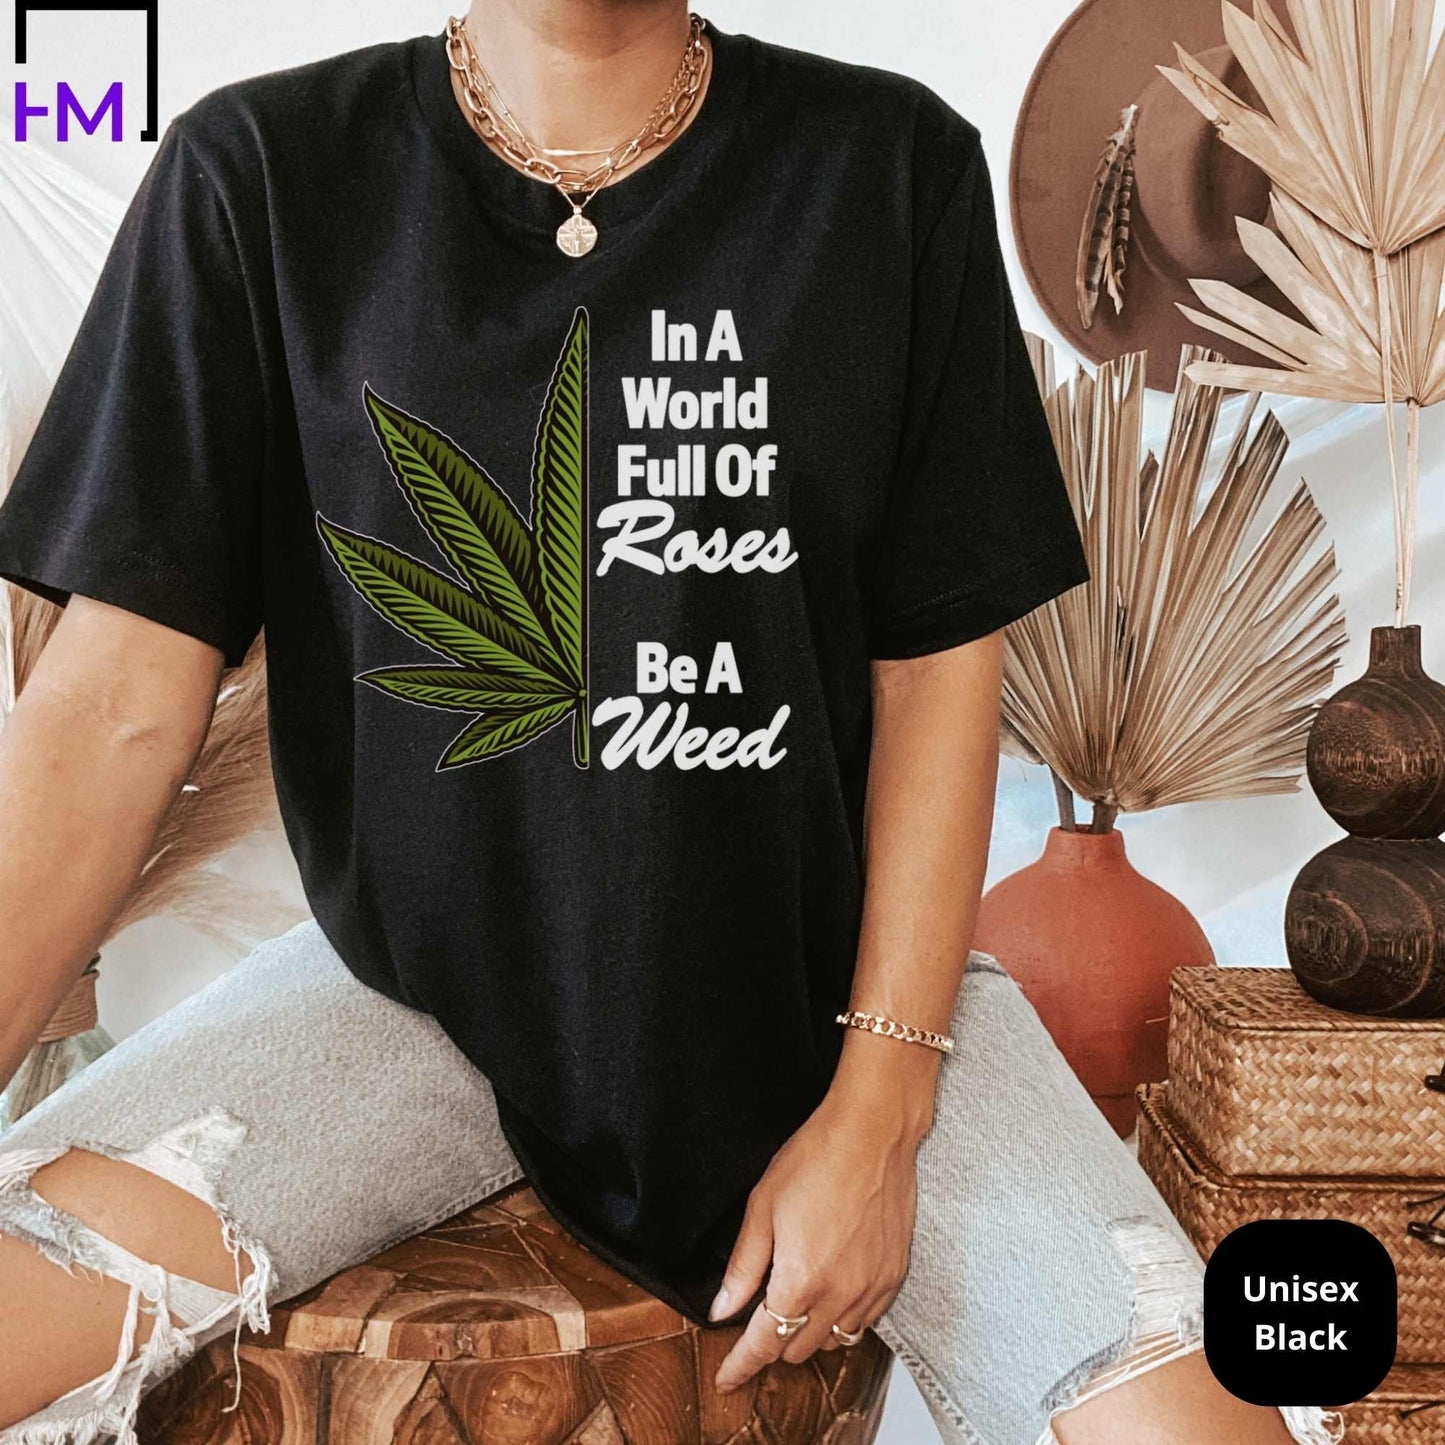 Stoner Gifts, Weed T Shirt, Stoner Girl Tee, Marijuana apparel, Cannabis Clothing, Gift for Her, Hippie Accessories, 420 Gift, Mary Jane HMDesignStudioUS